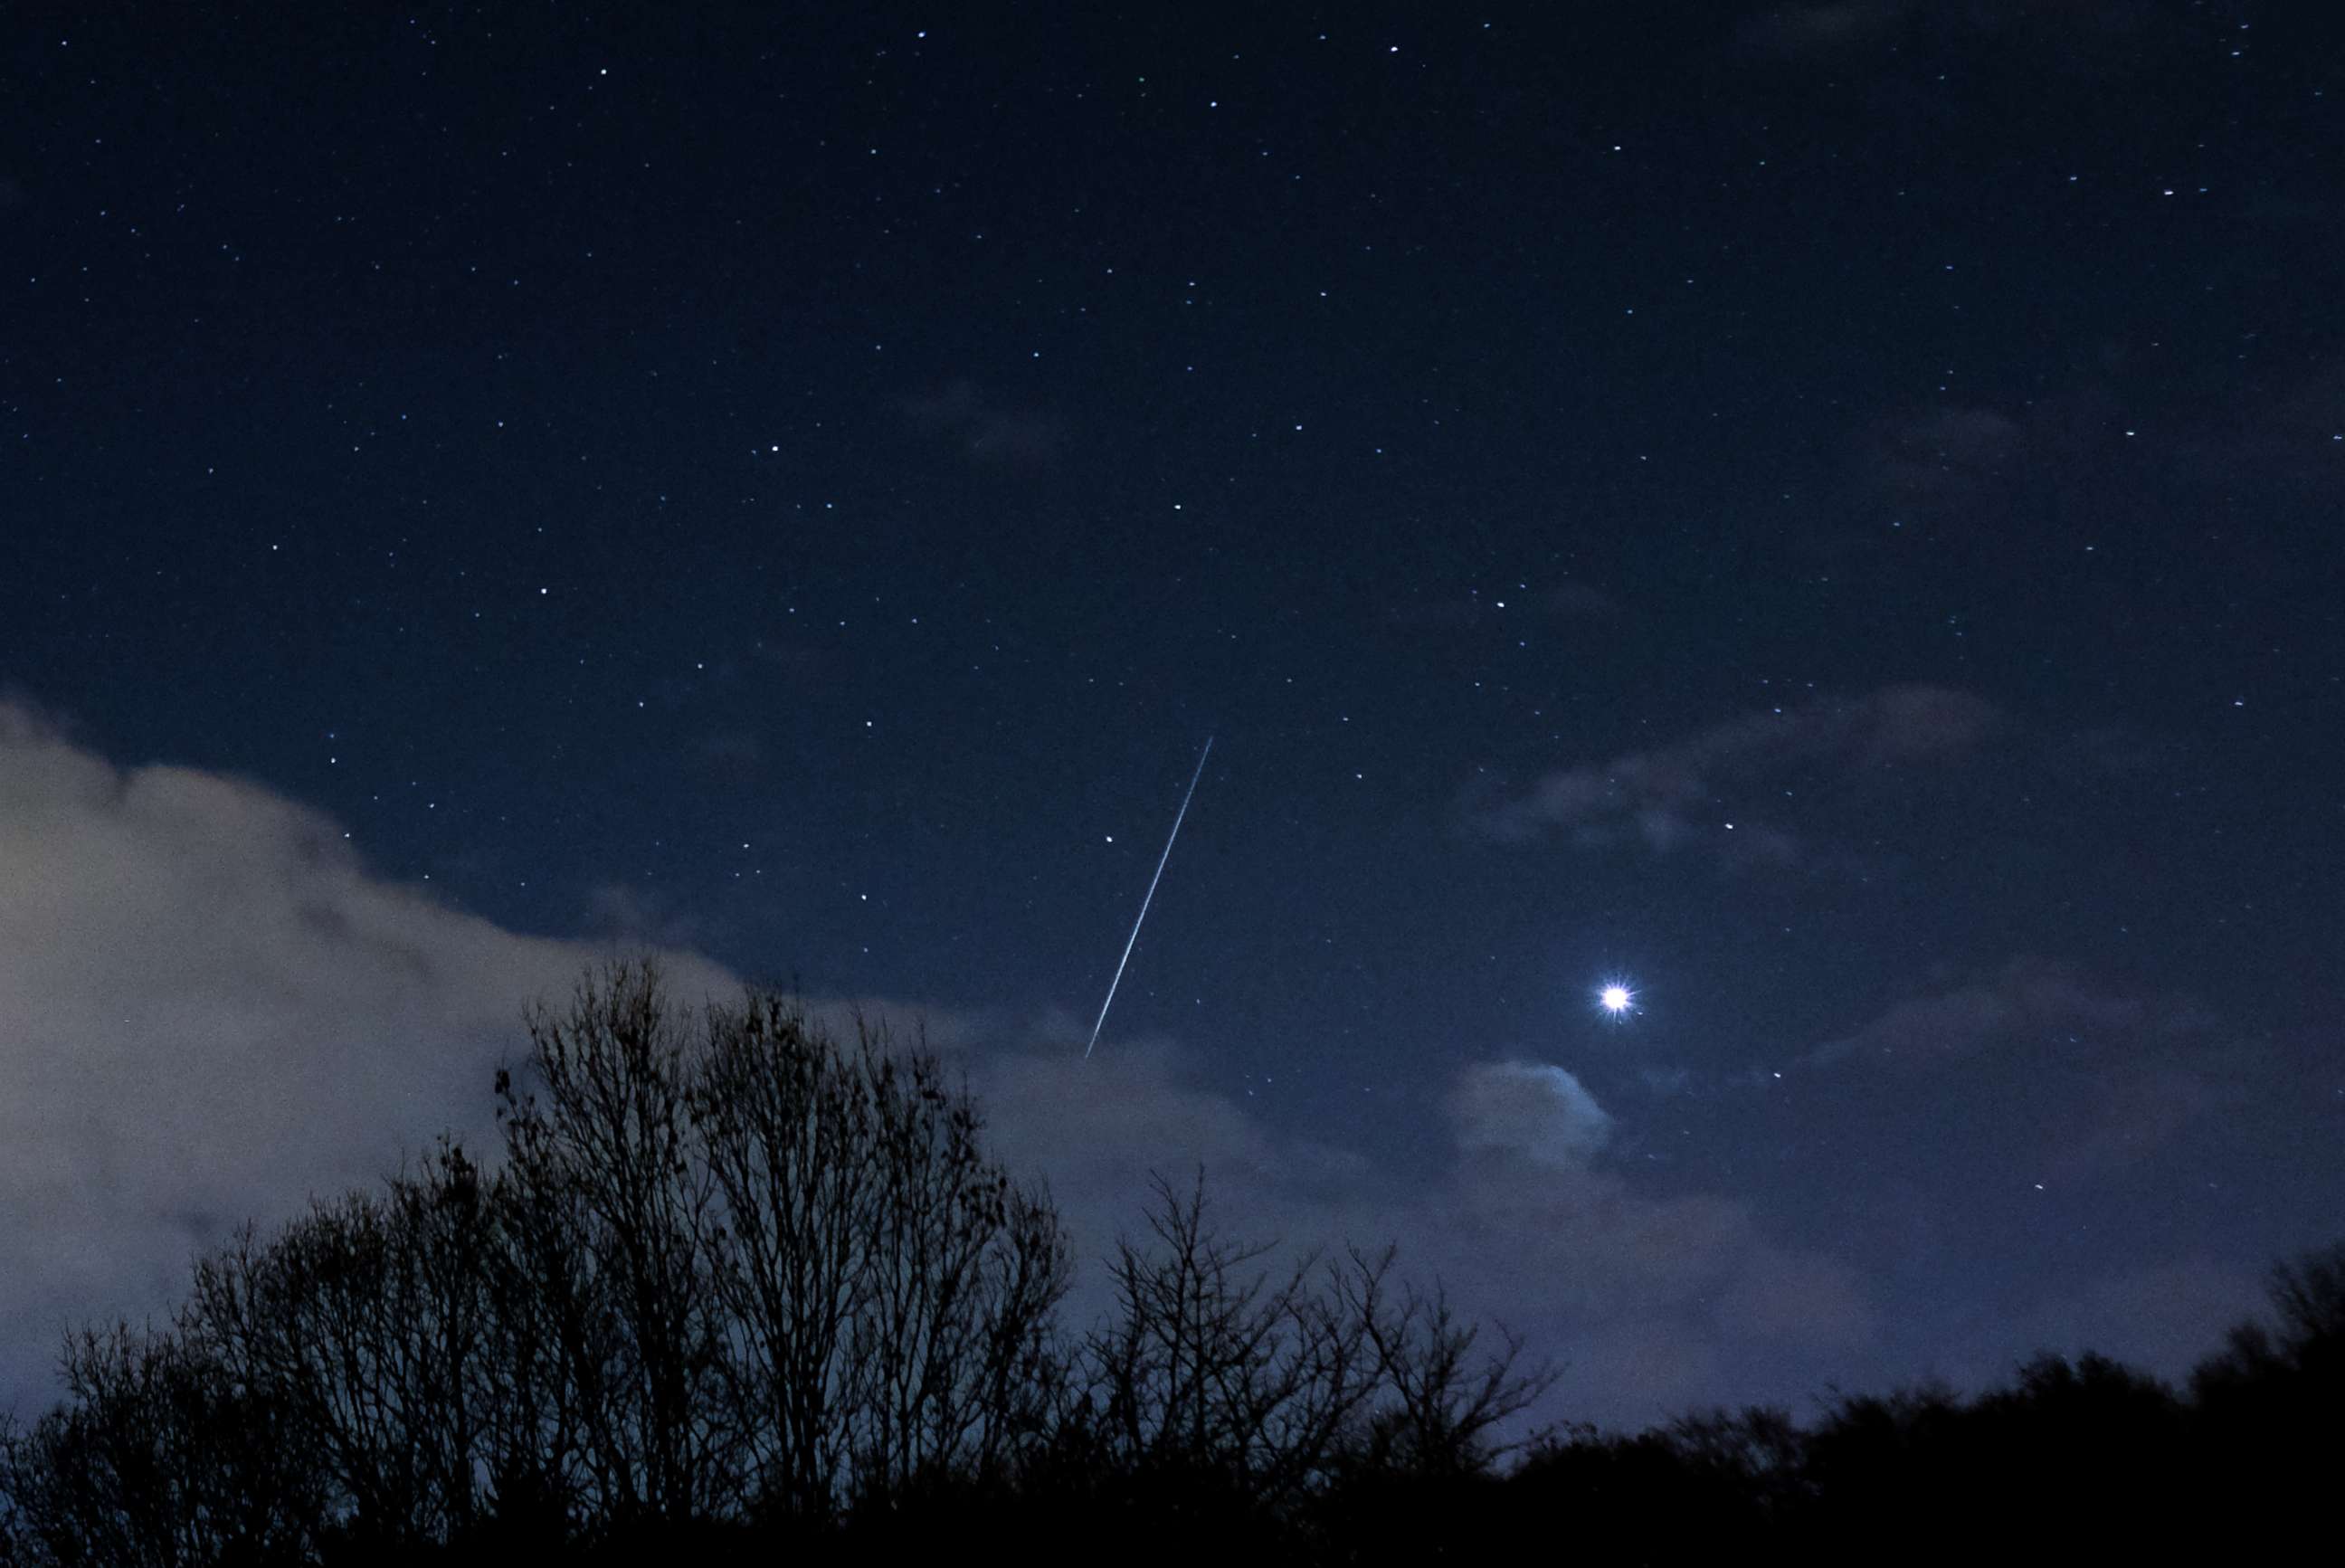 PHOTO: A meteor from the Geminid Meteor shower streaks across the night sky, Dec. 14, 2018, in Saltburn By The Sea, United Kingdom.